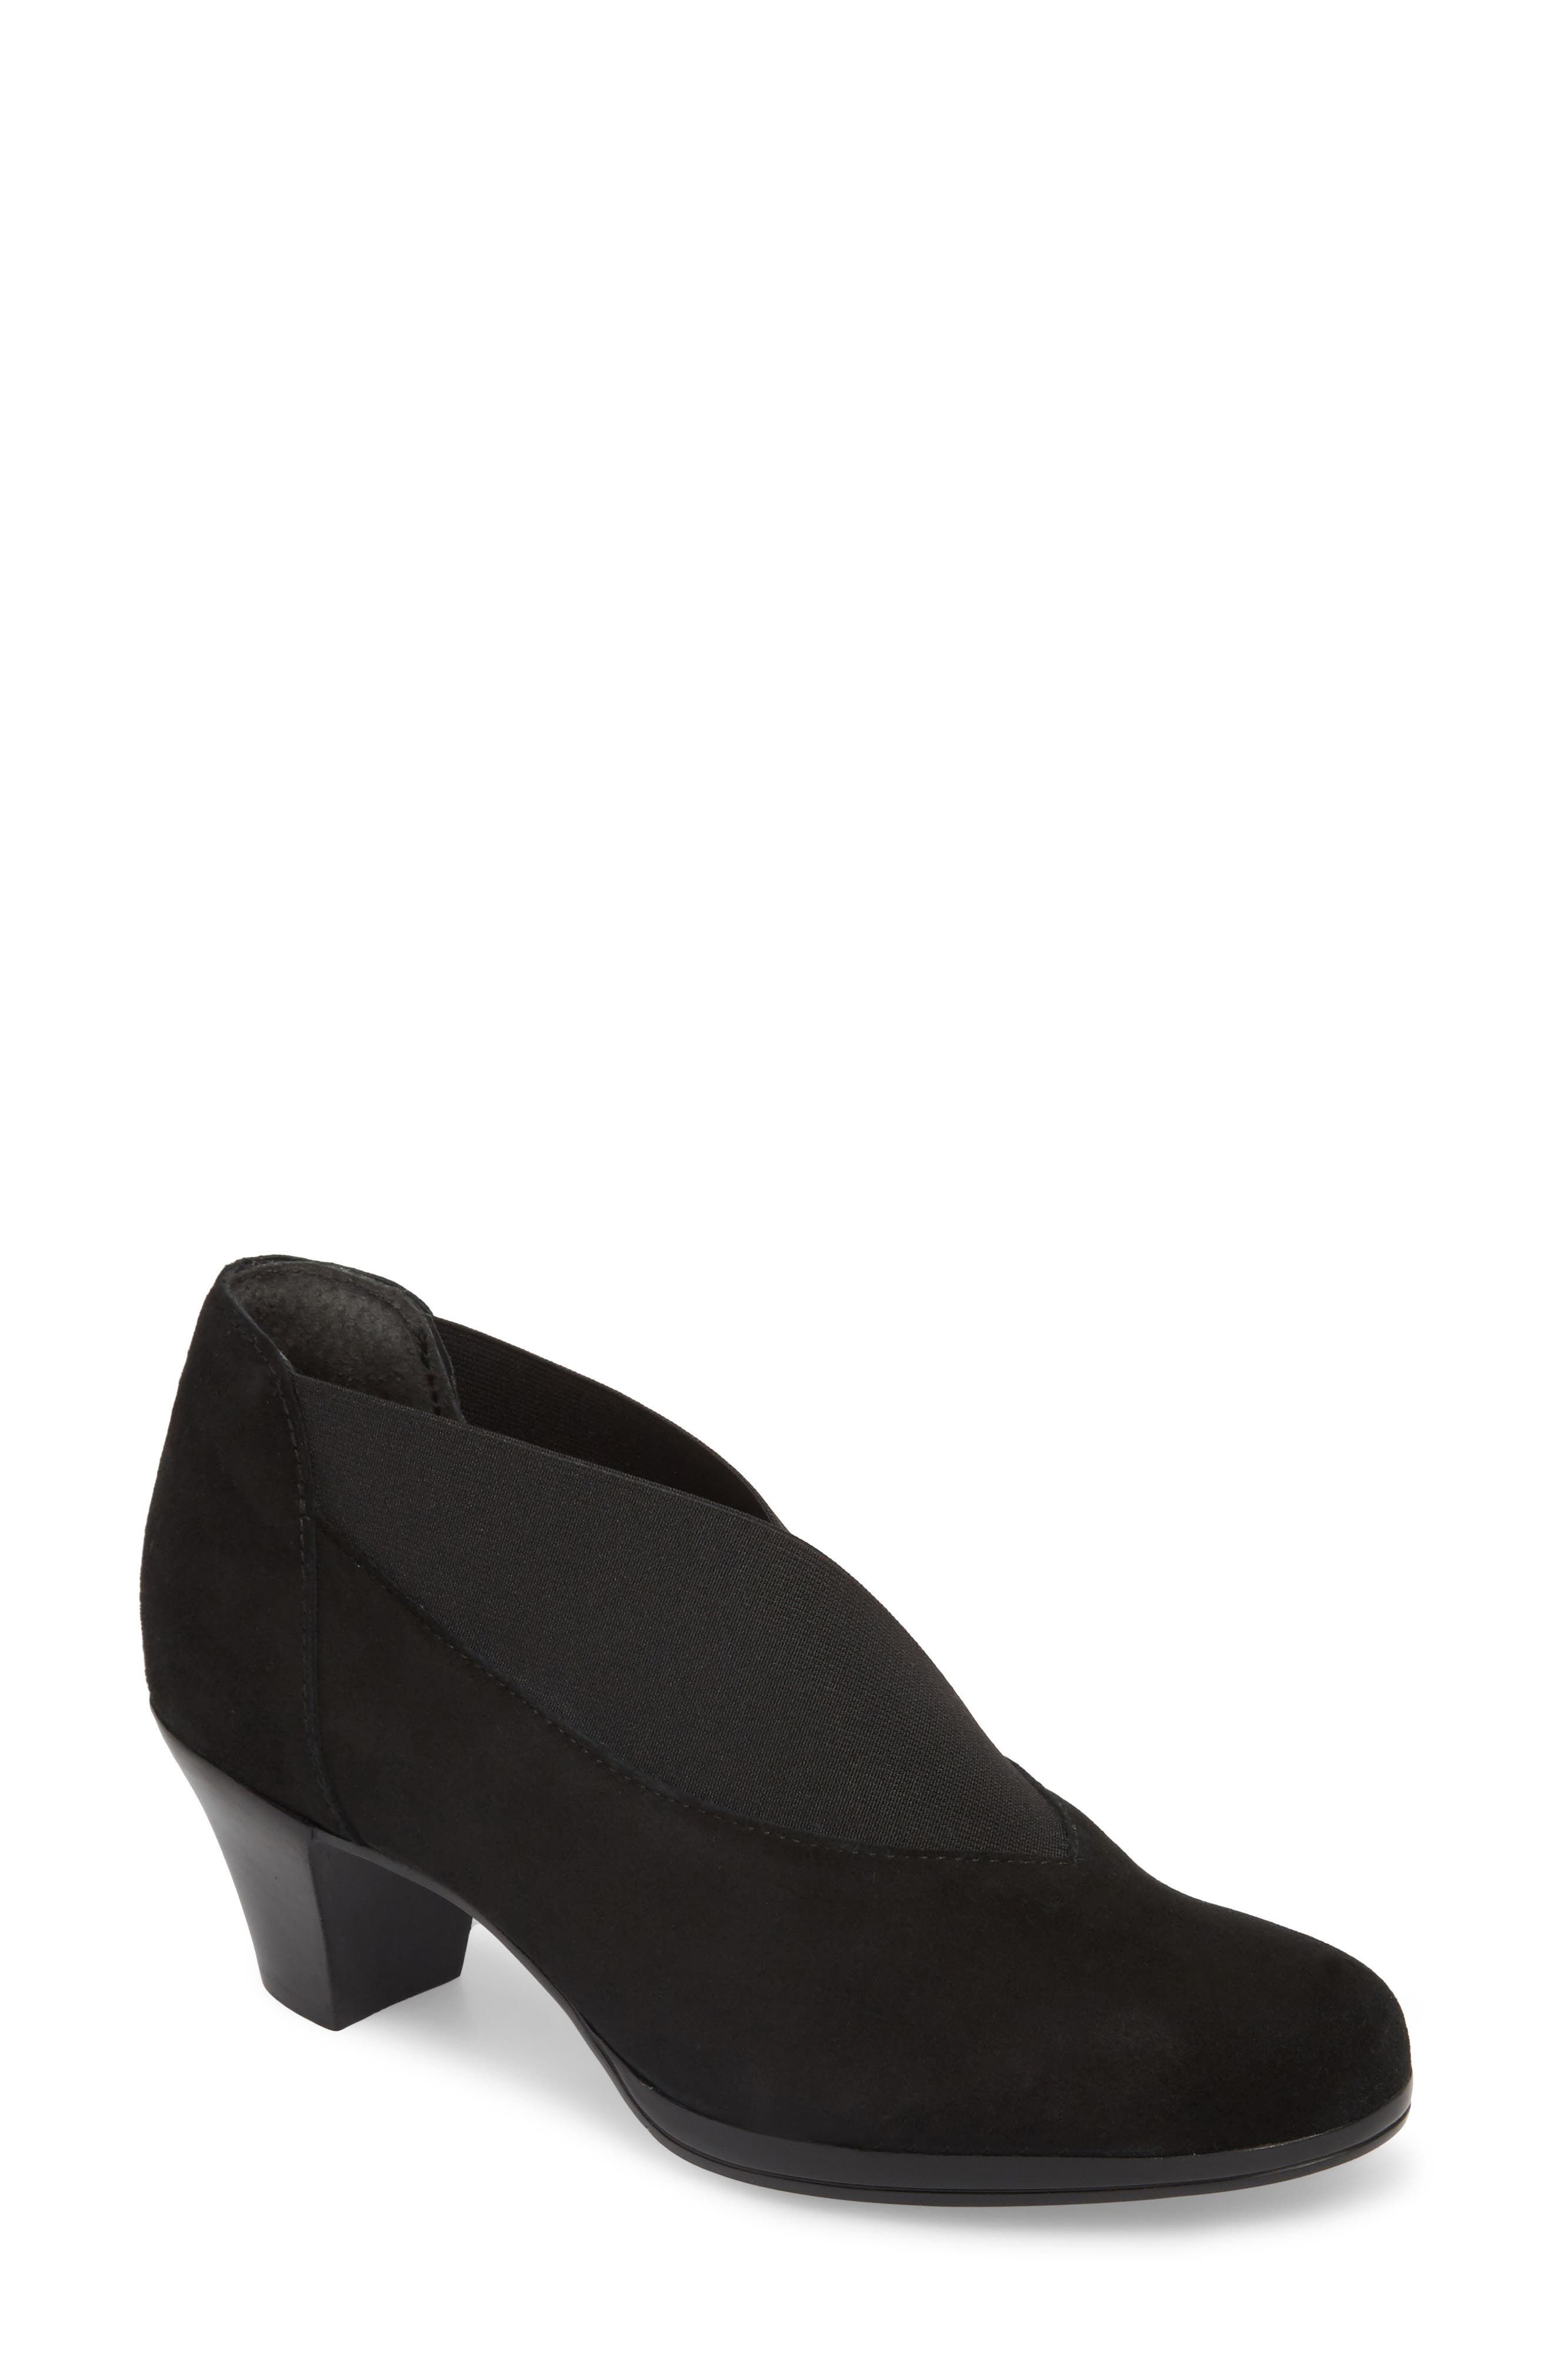 nordstrom munro shoes sale